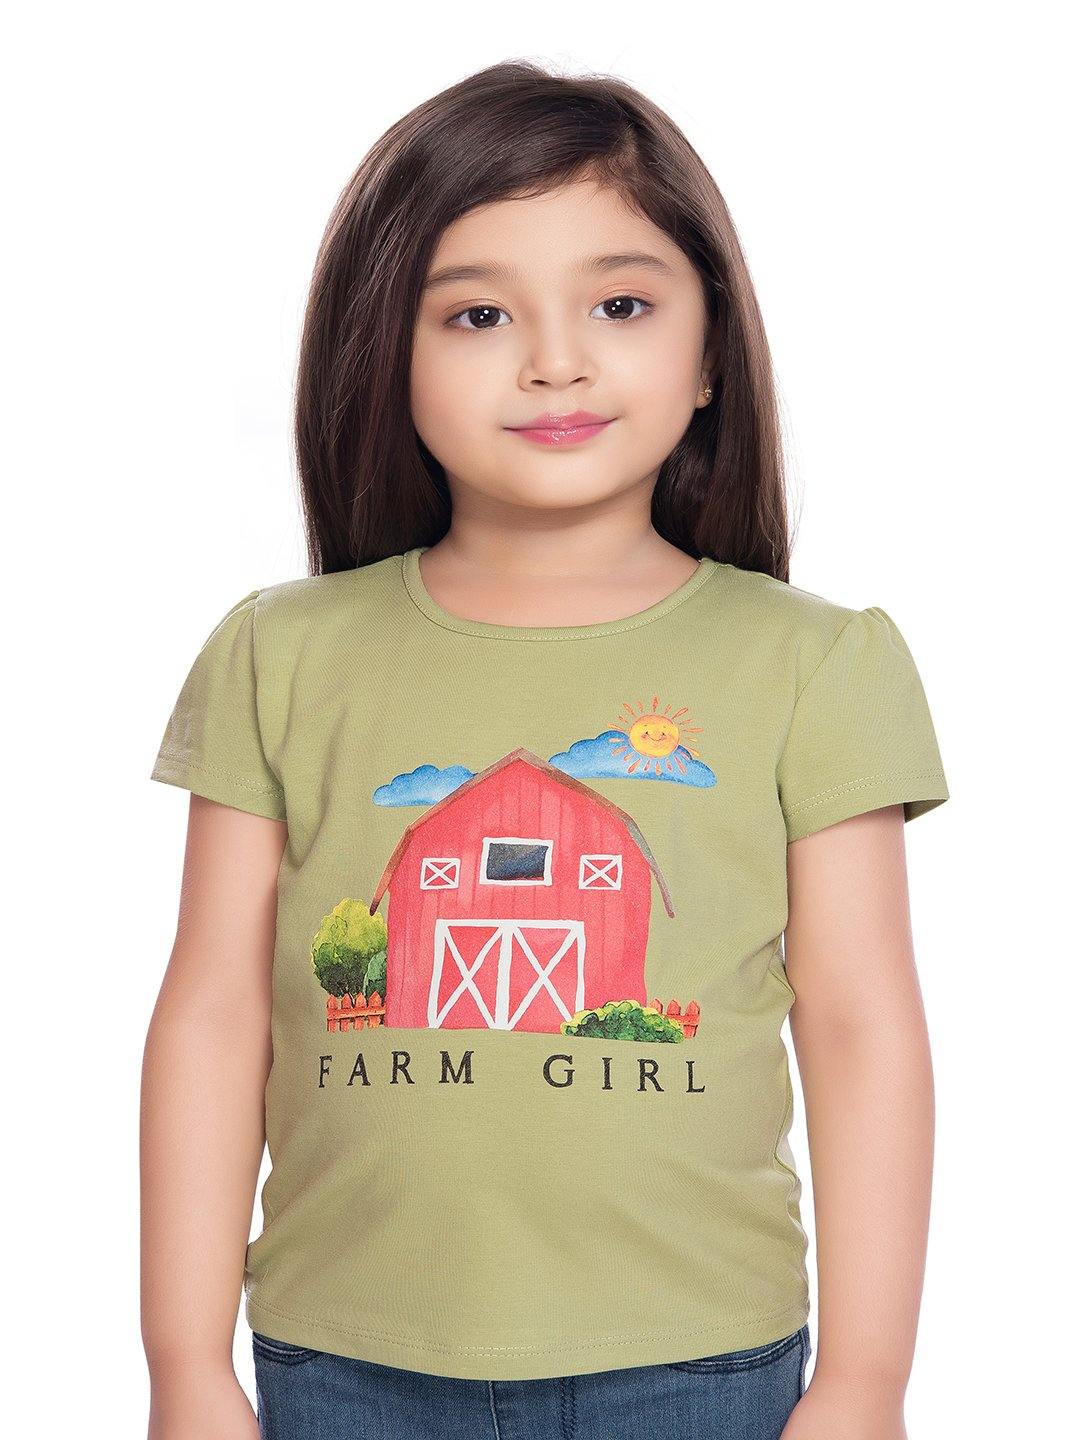 Tiny Baby Green Colored Top - T-106 Green - TINY BABY INDIA shop.tinybaby.in